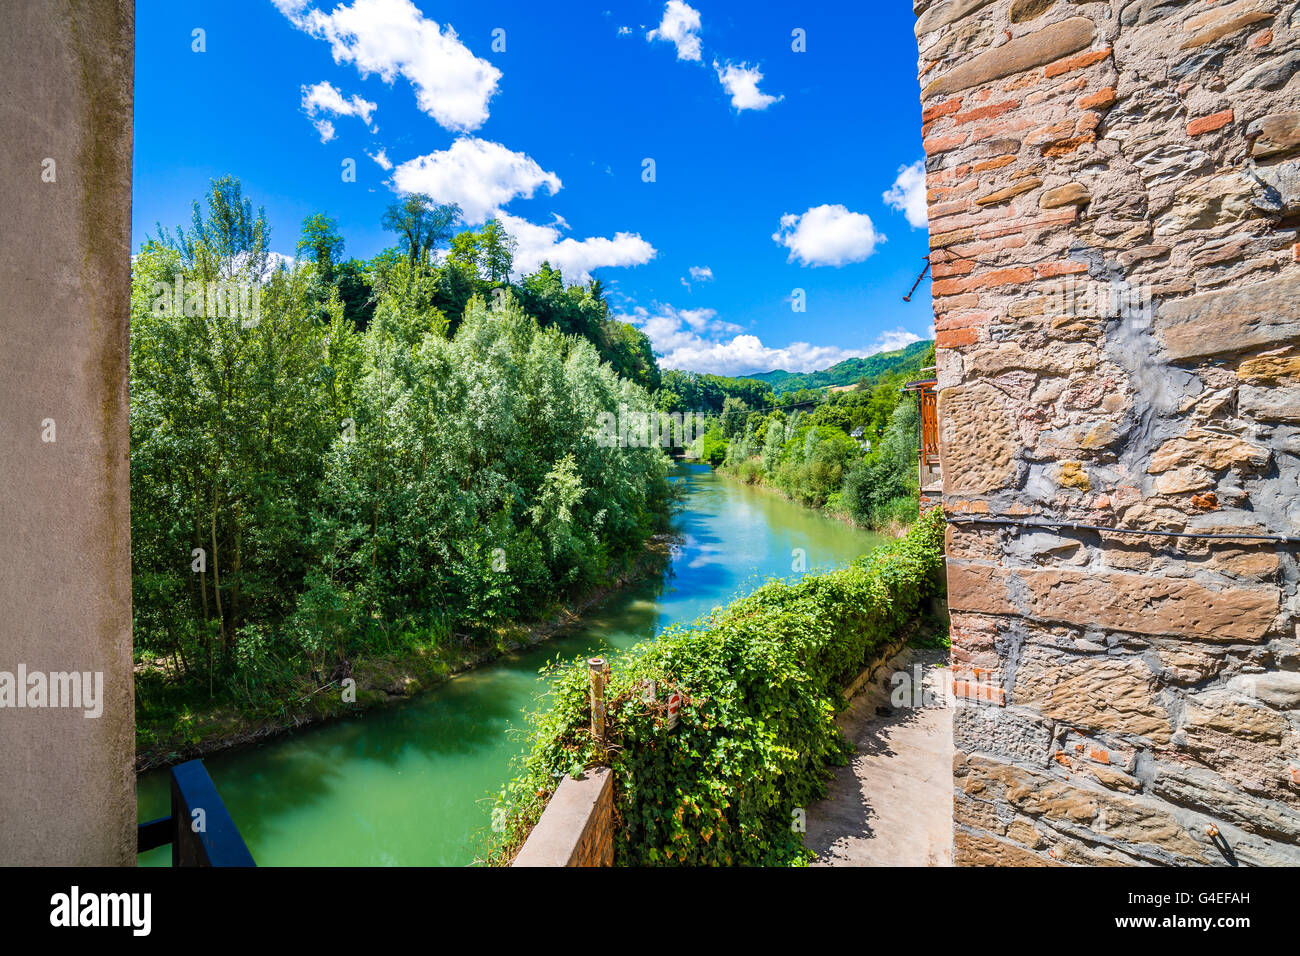 the serenity of a quiet village in the hills of Romagna countryside in Italy, while the cool waters of a placid river bathe the hamlet Stock Photo